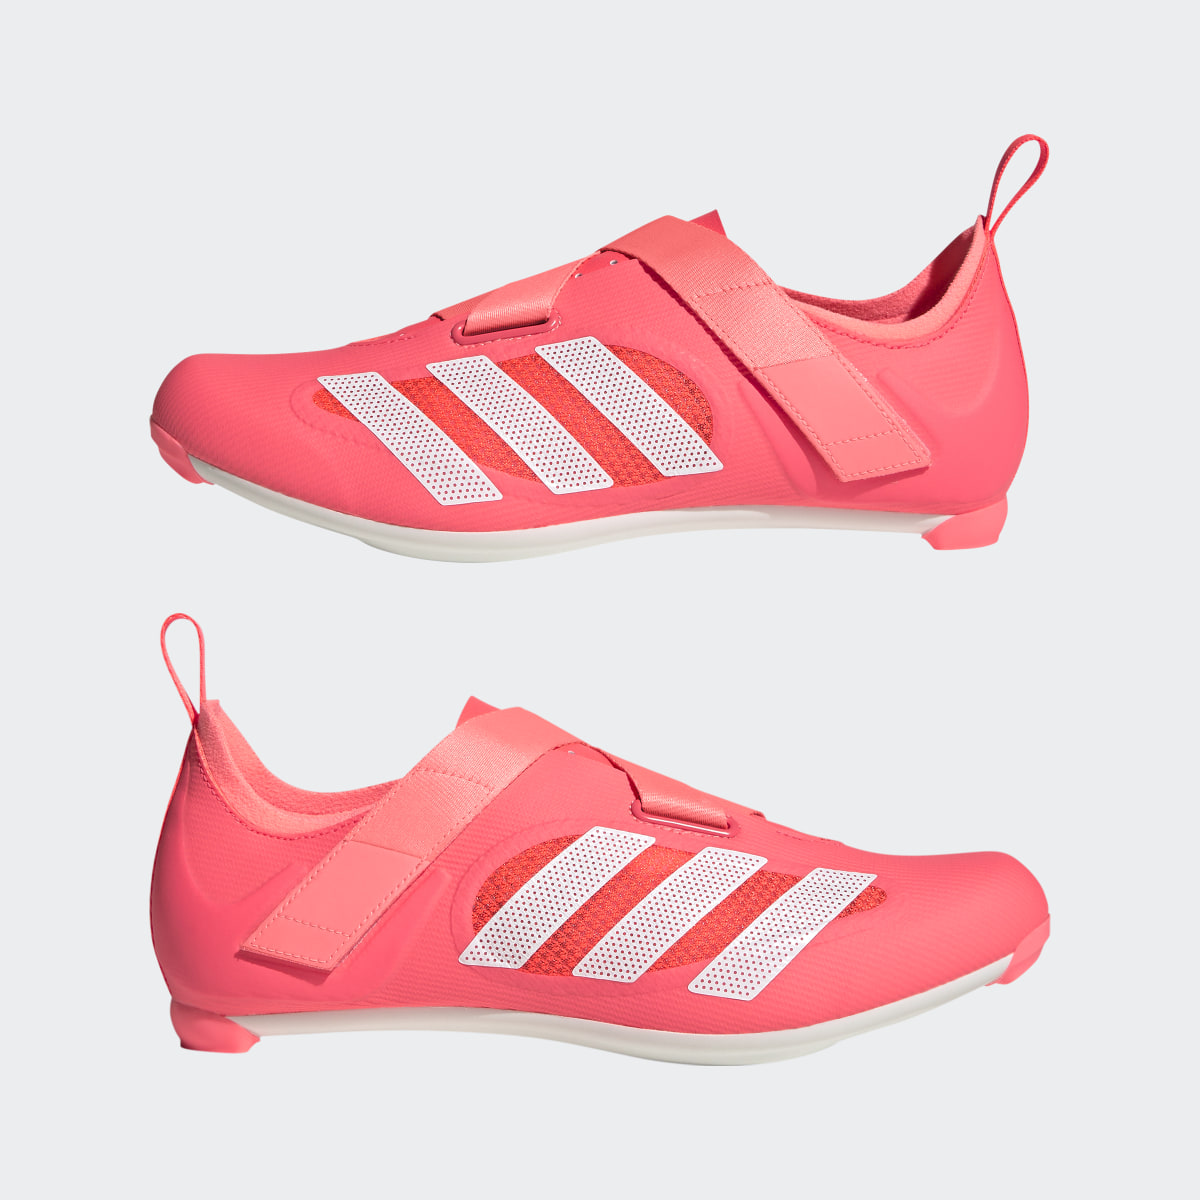 Adidas CHAUSSURE D'INDOOR CYCLING. 13